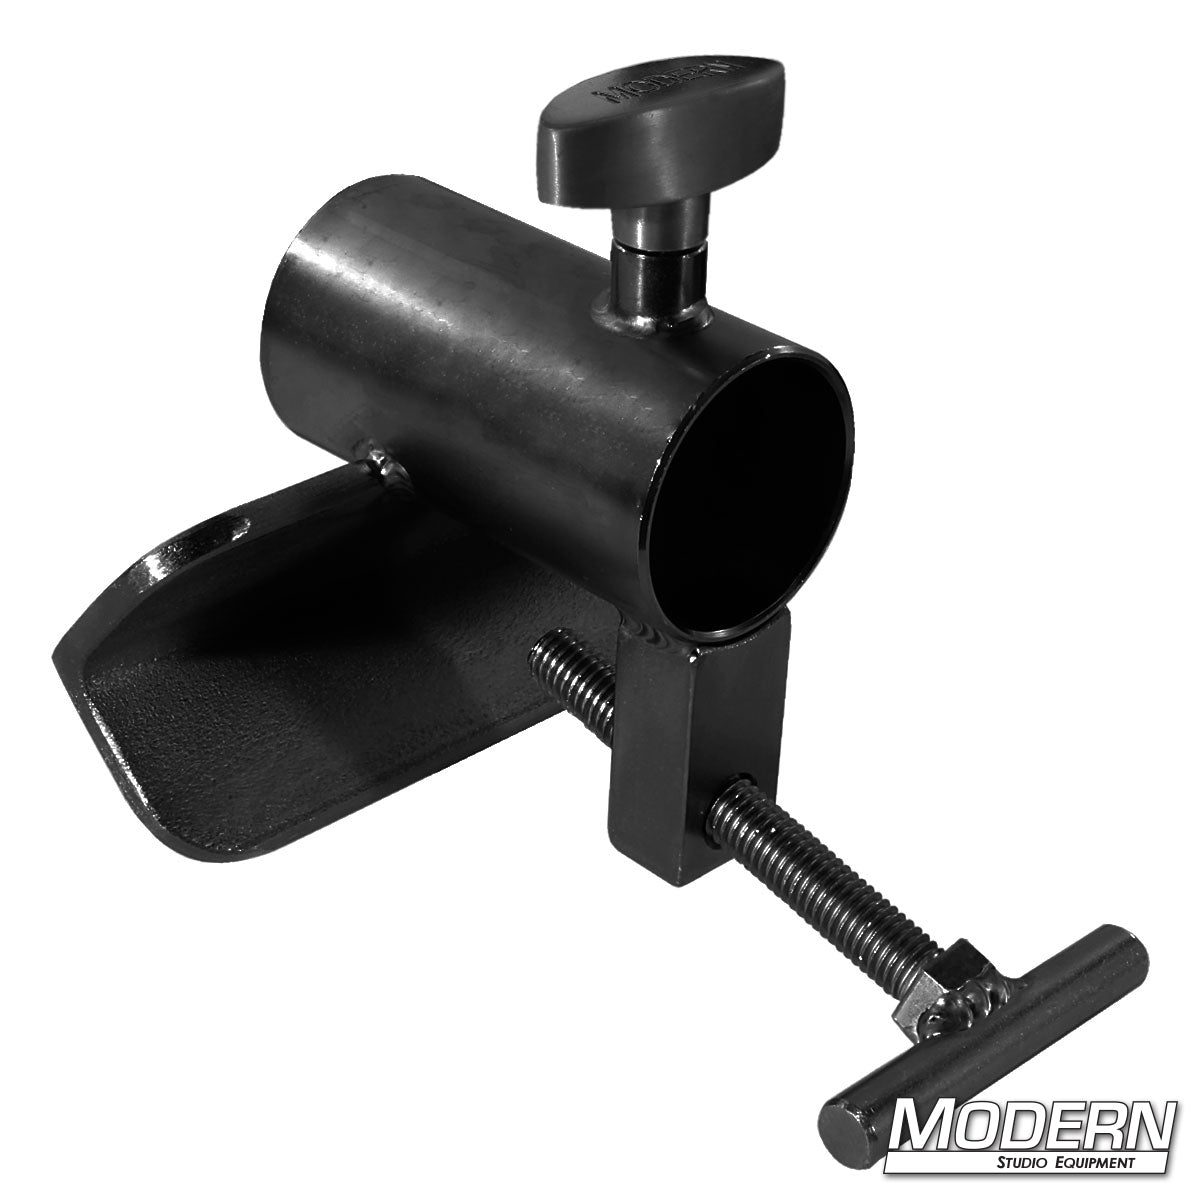 Candlestick Clamp for 1-1/4" Speed-Rail®